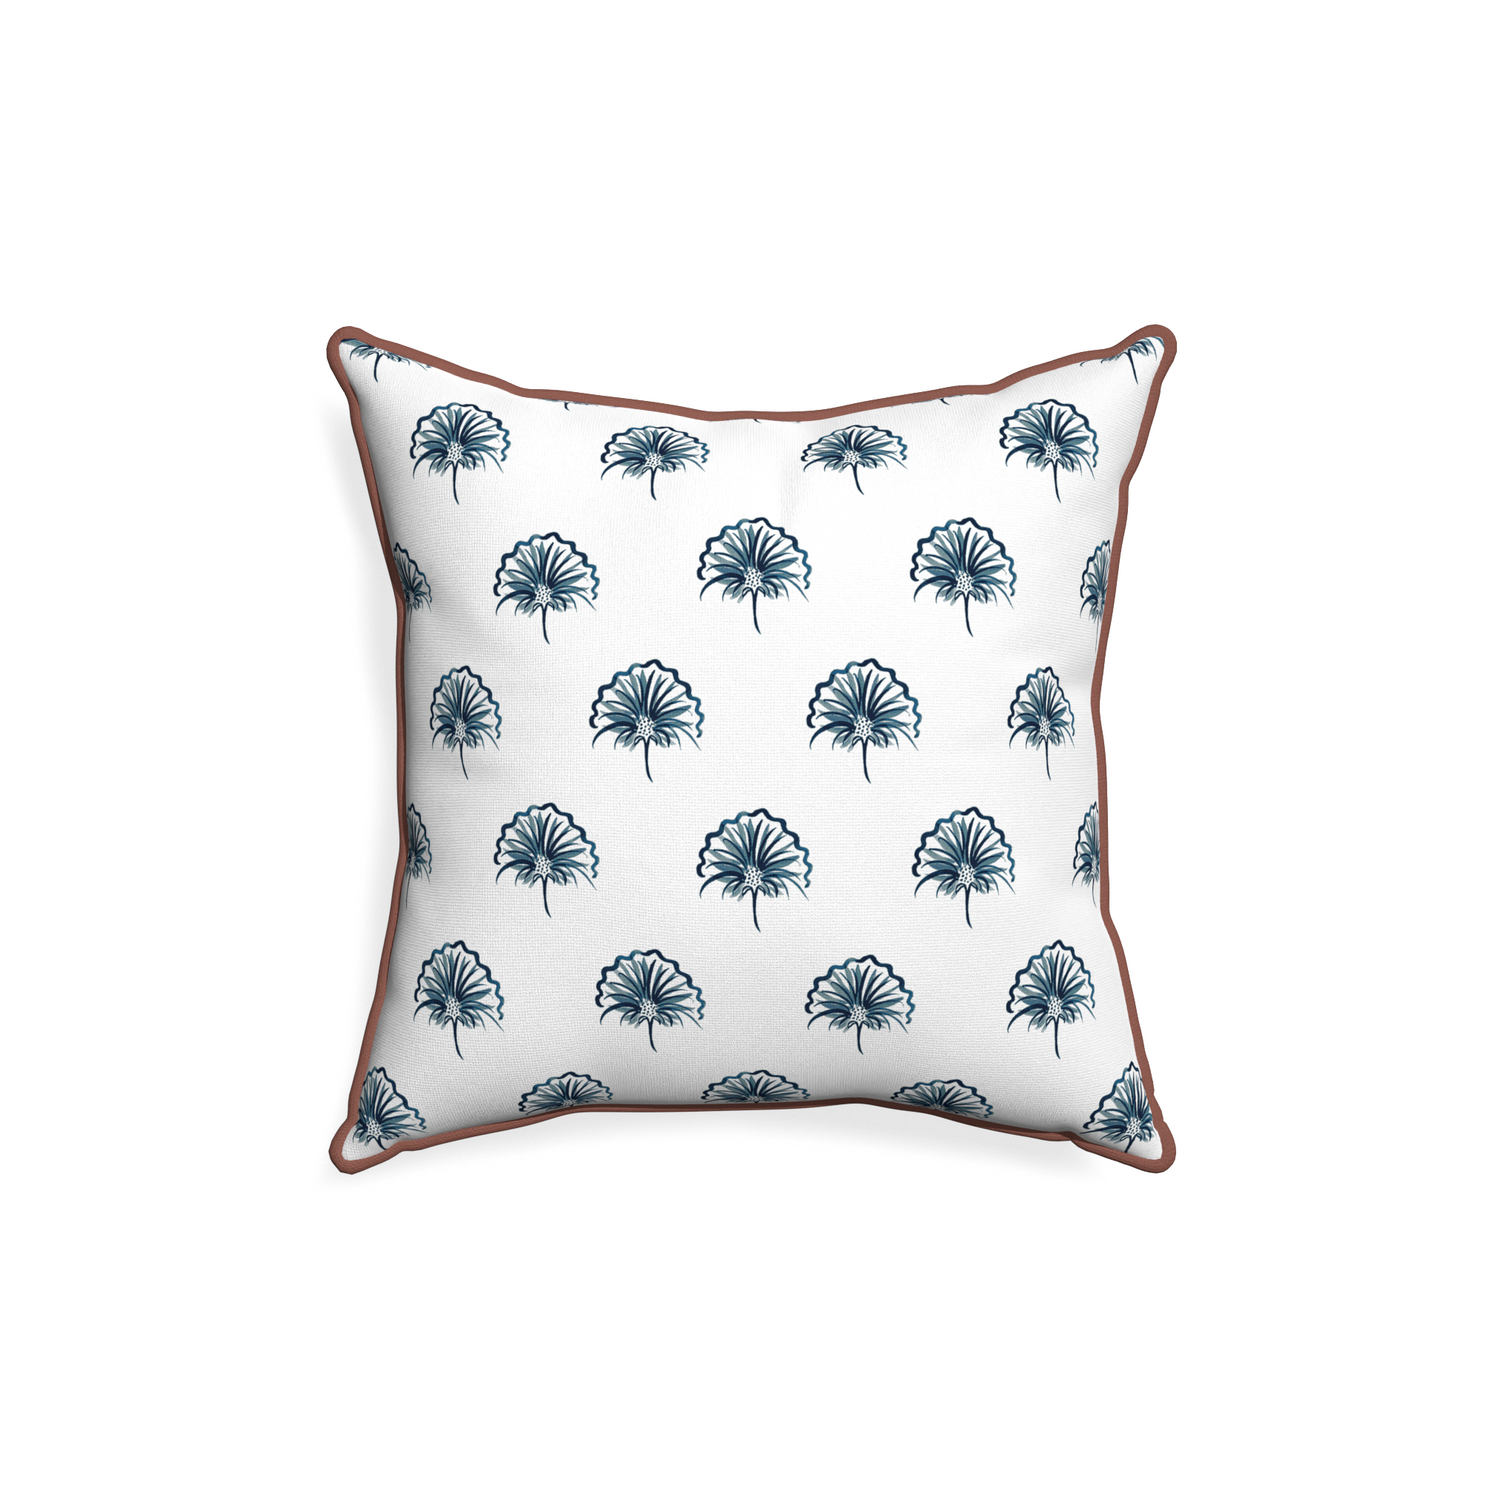 18-square penelope midnight custom floral navypillow with w piping on white background